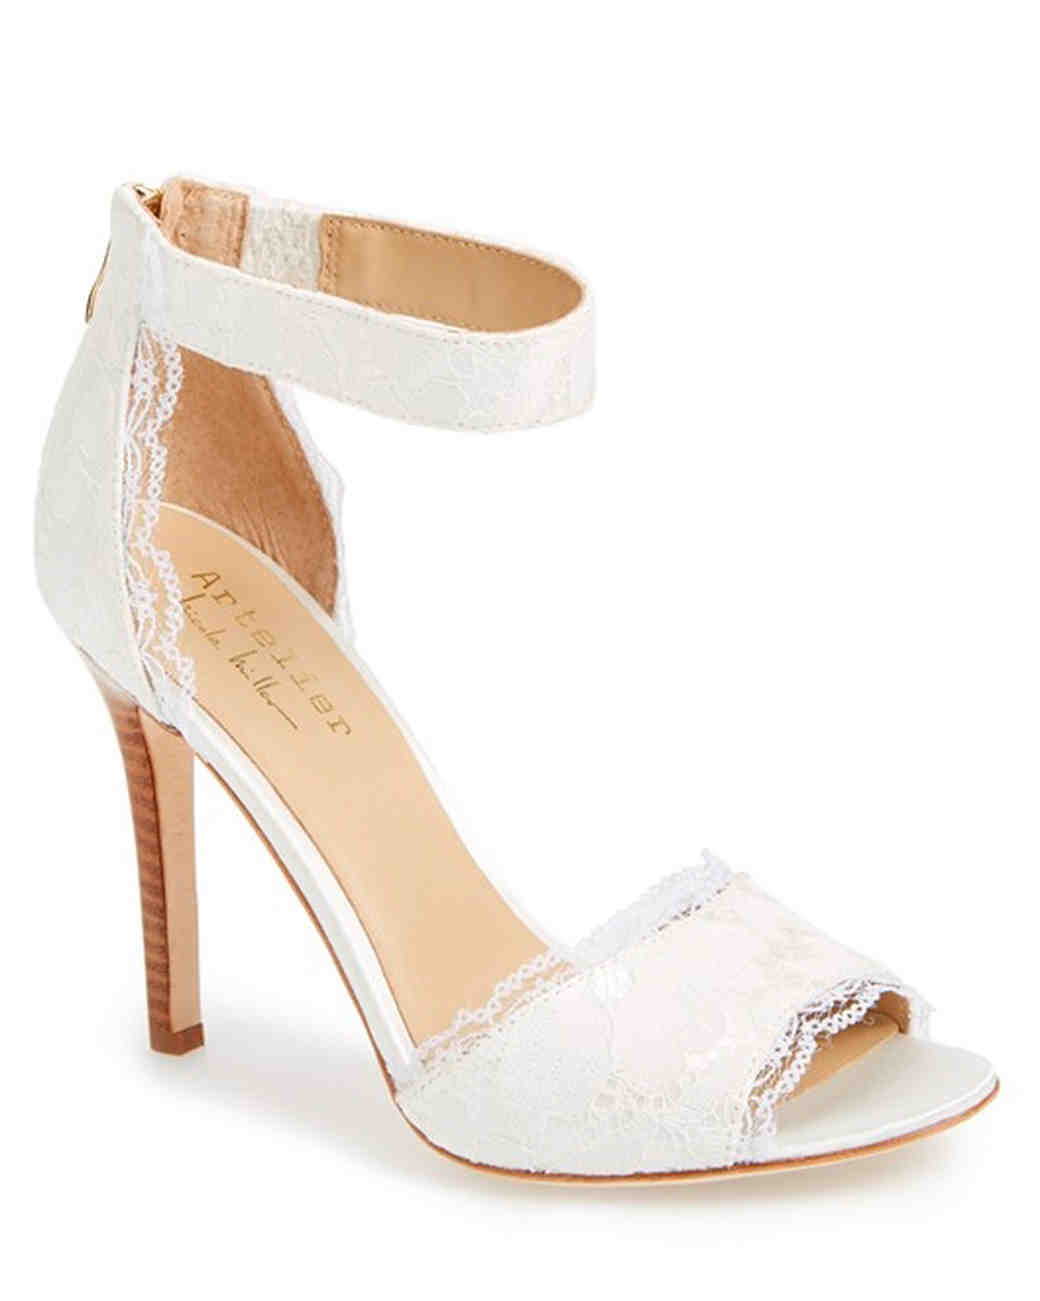 Popular Wedding Shoes
 50 Best Shoes for a Bride to Wear to a Summer Wedding